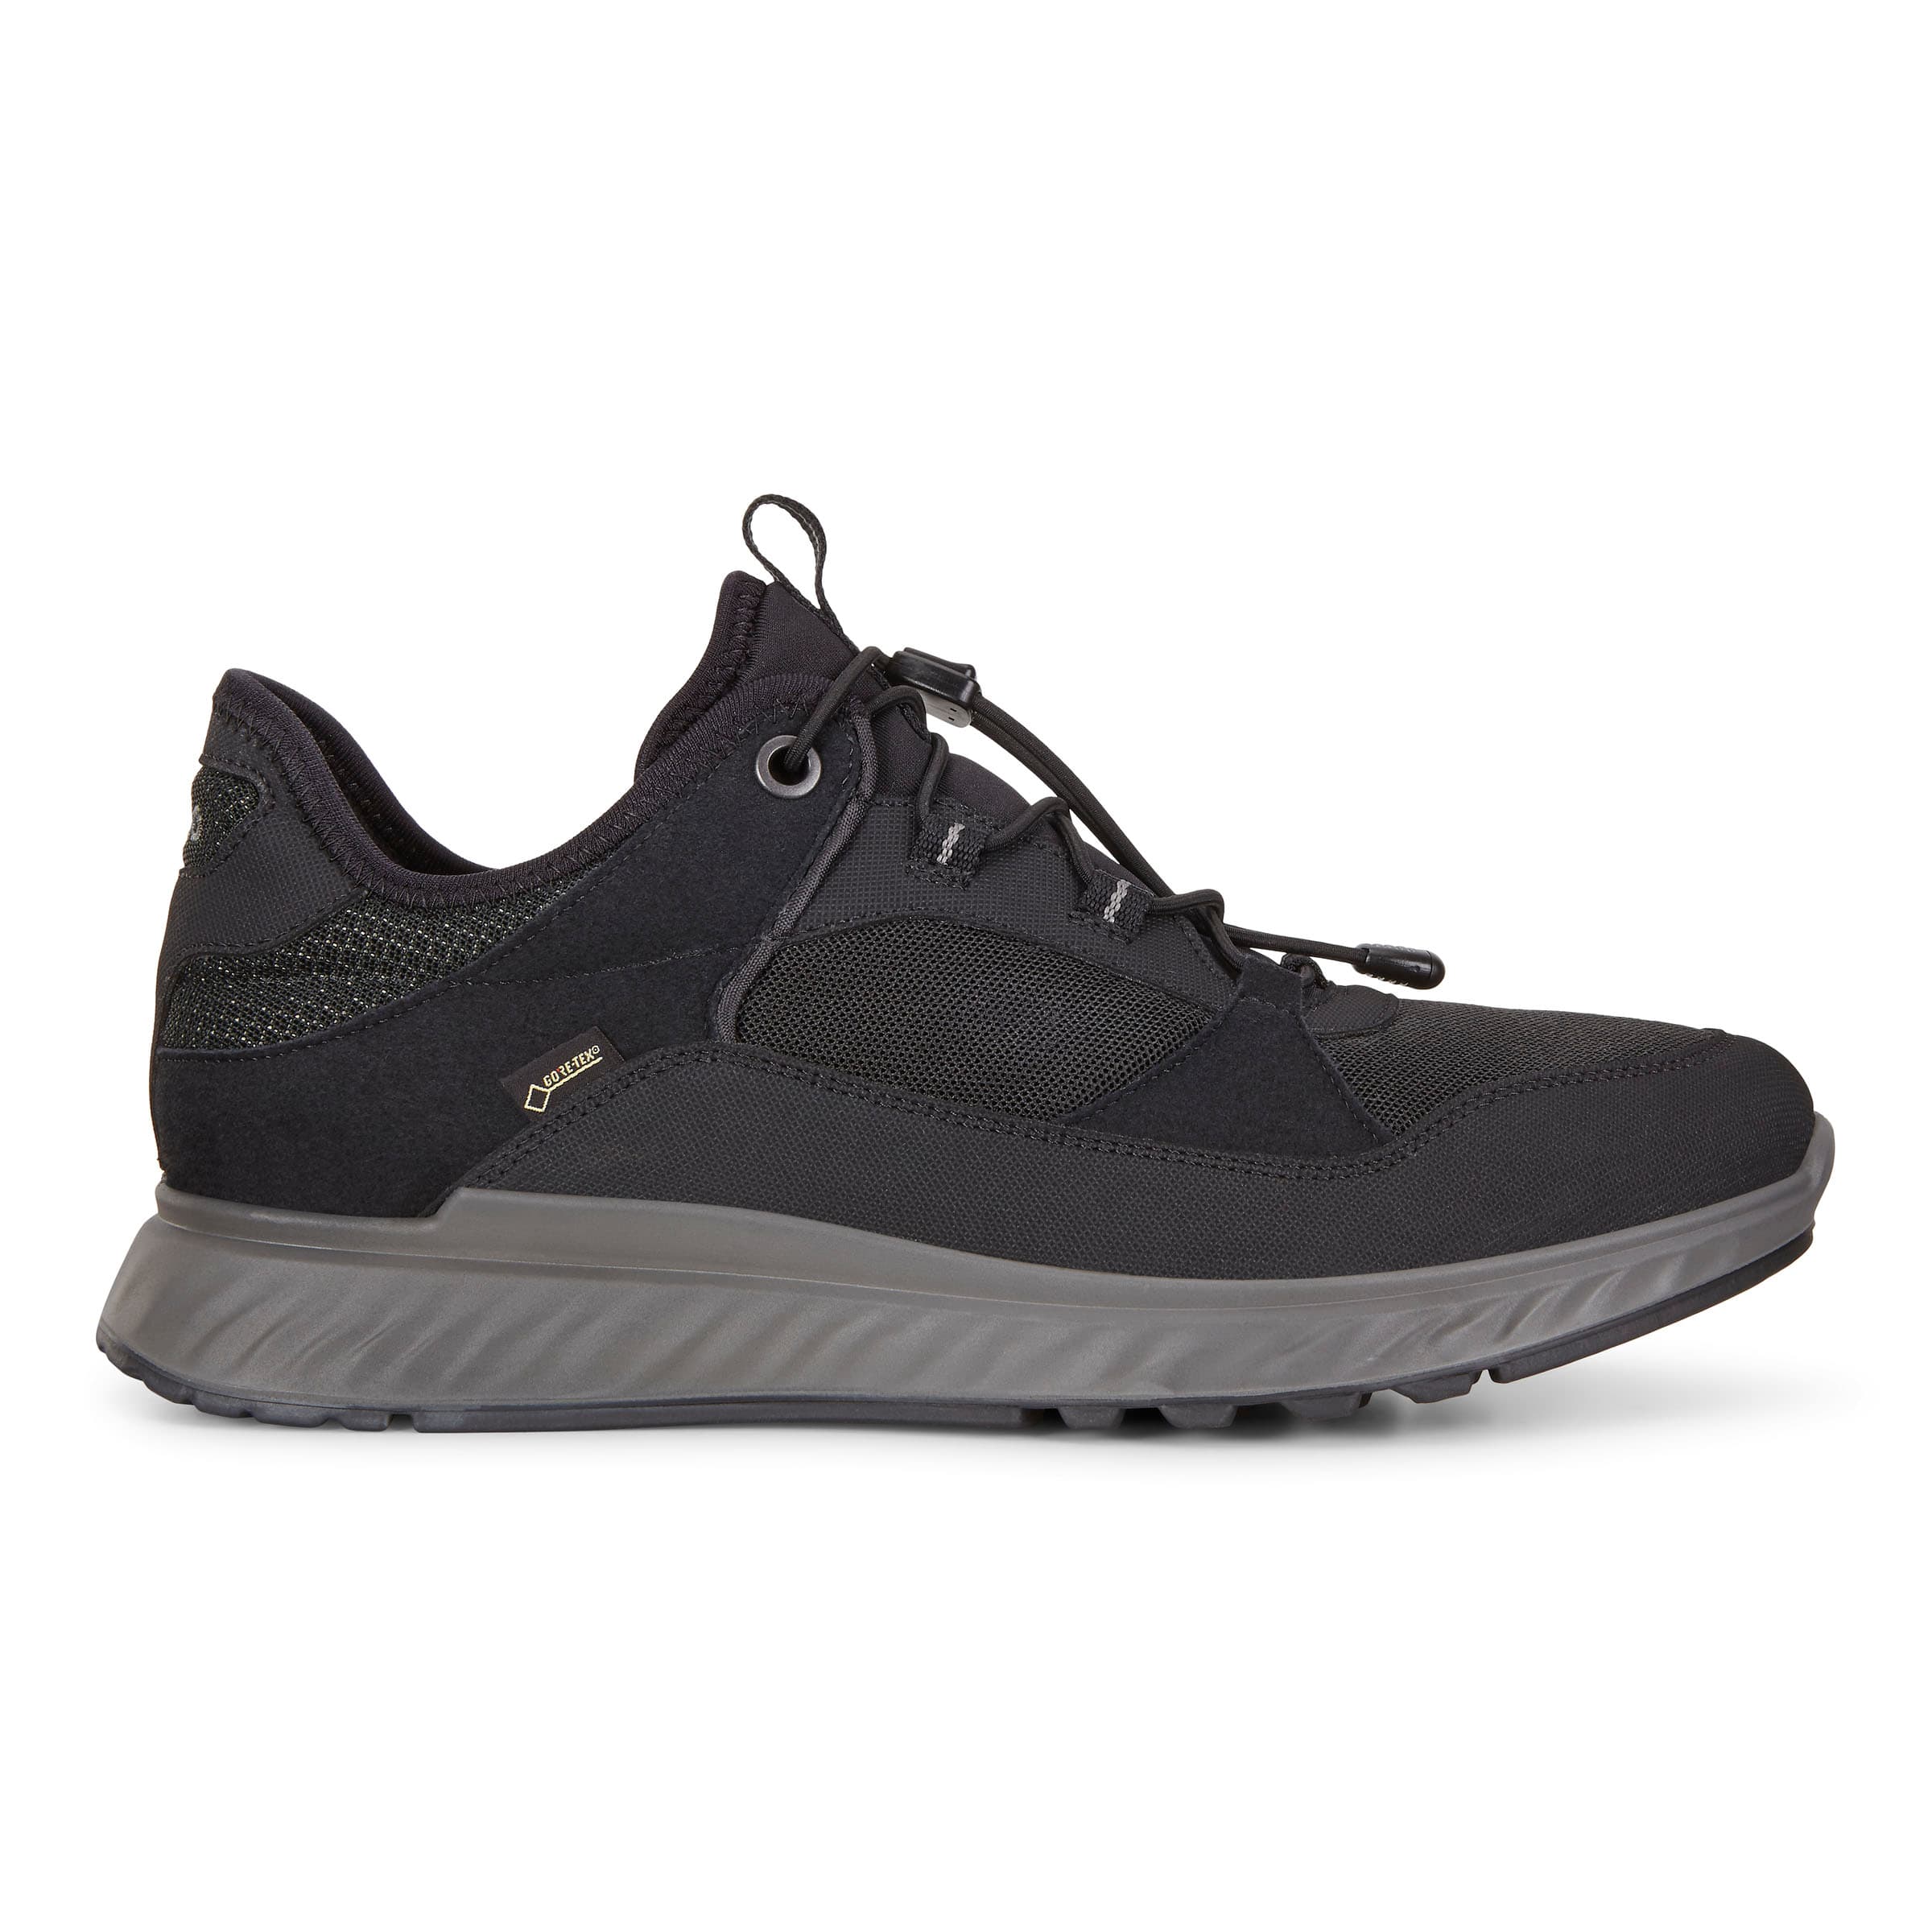 Buy Ecco Women's Exostride from Outnorth